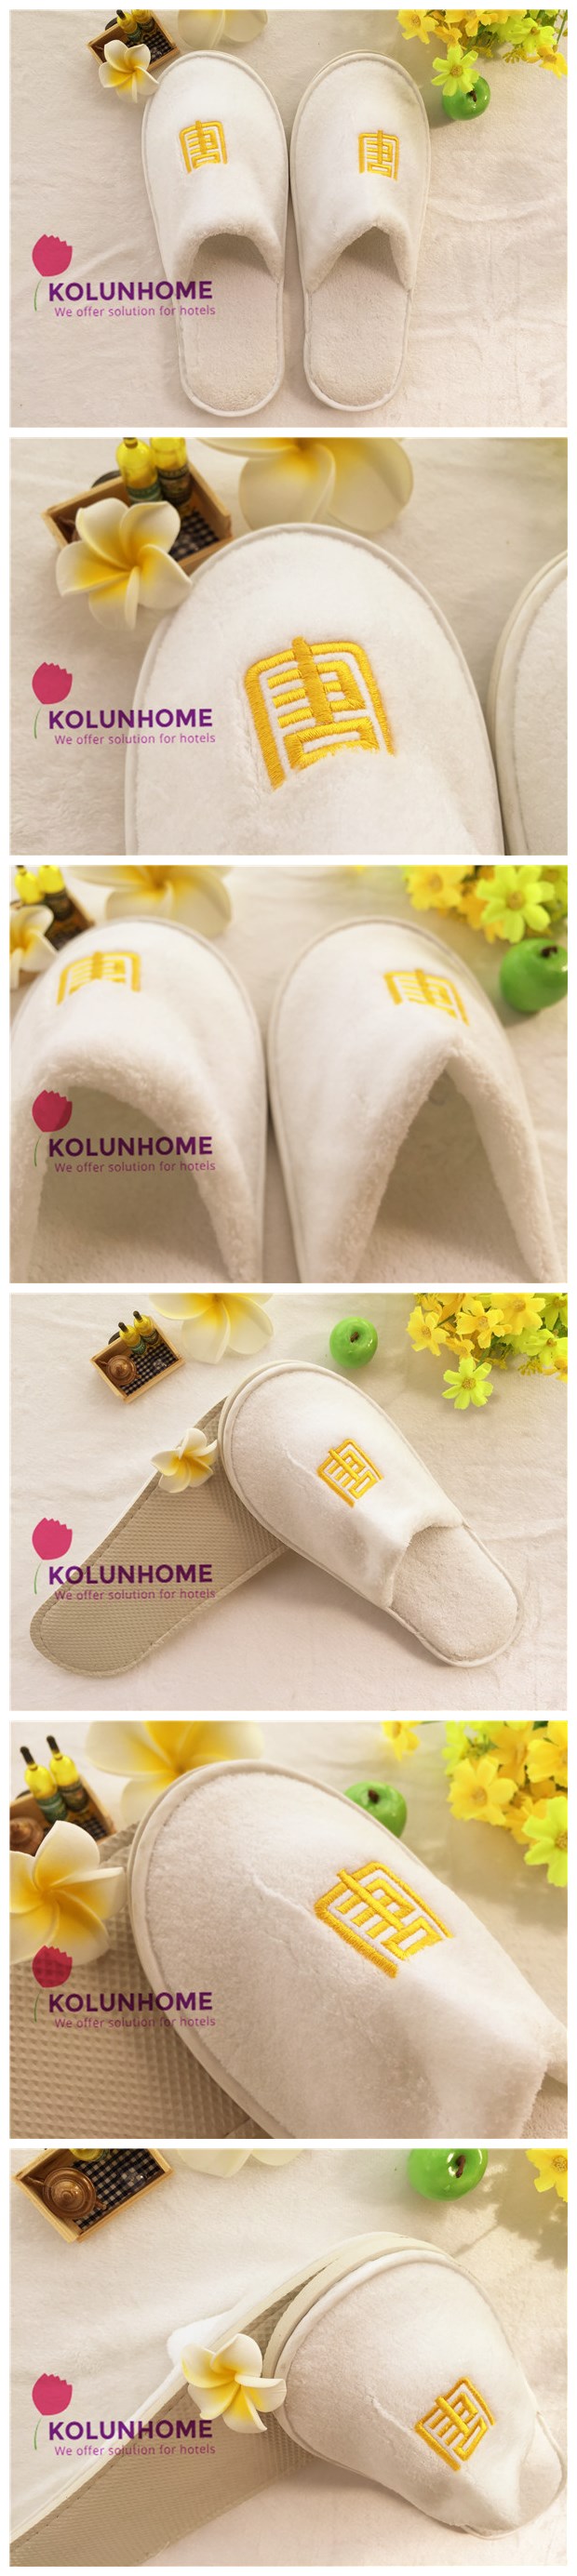 High quality hotel velour slipper with embroidary logo